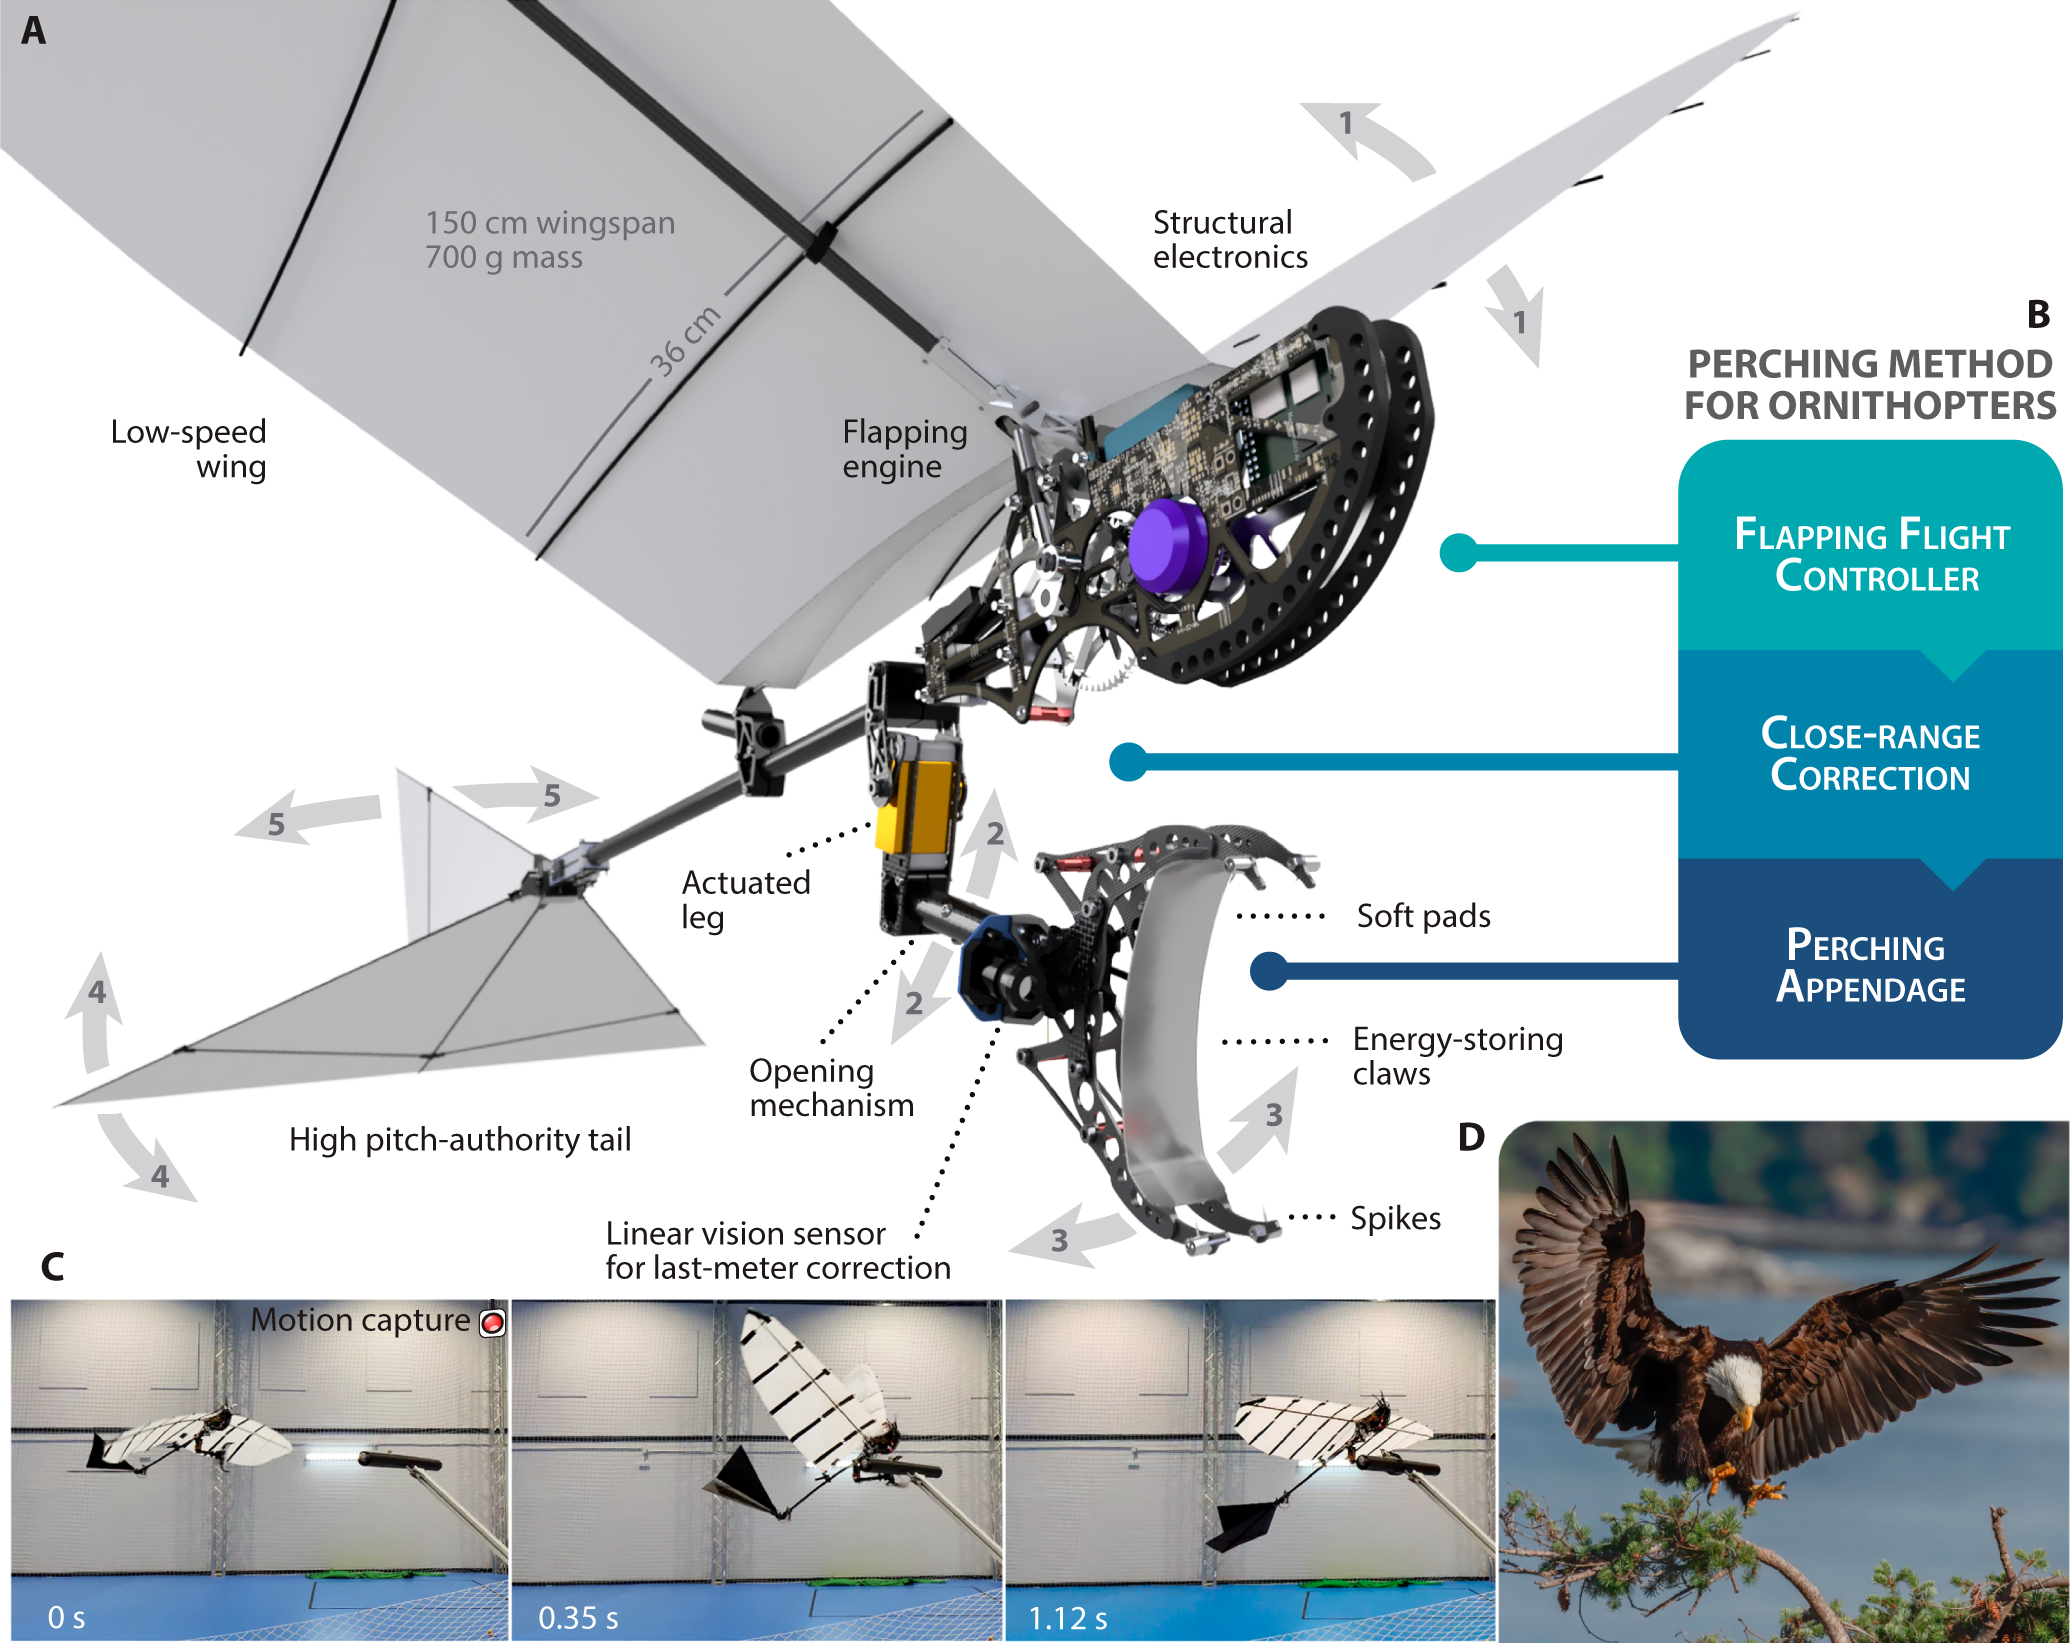 How ornithopters can perch autonomously on a branch